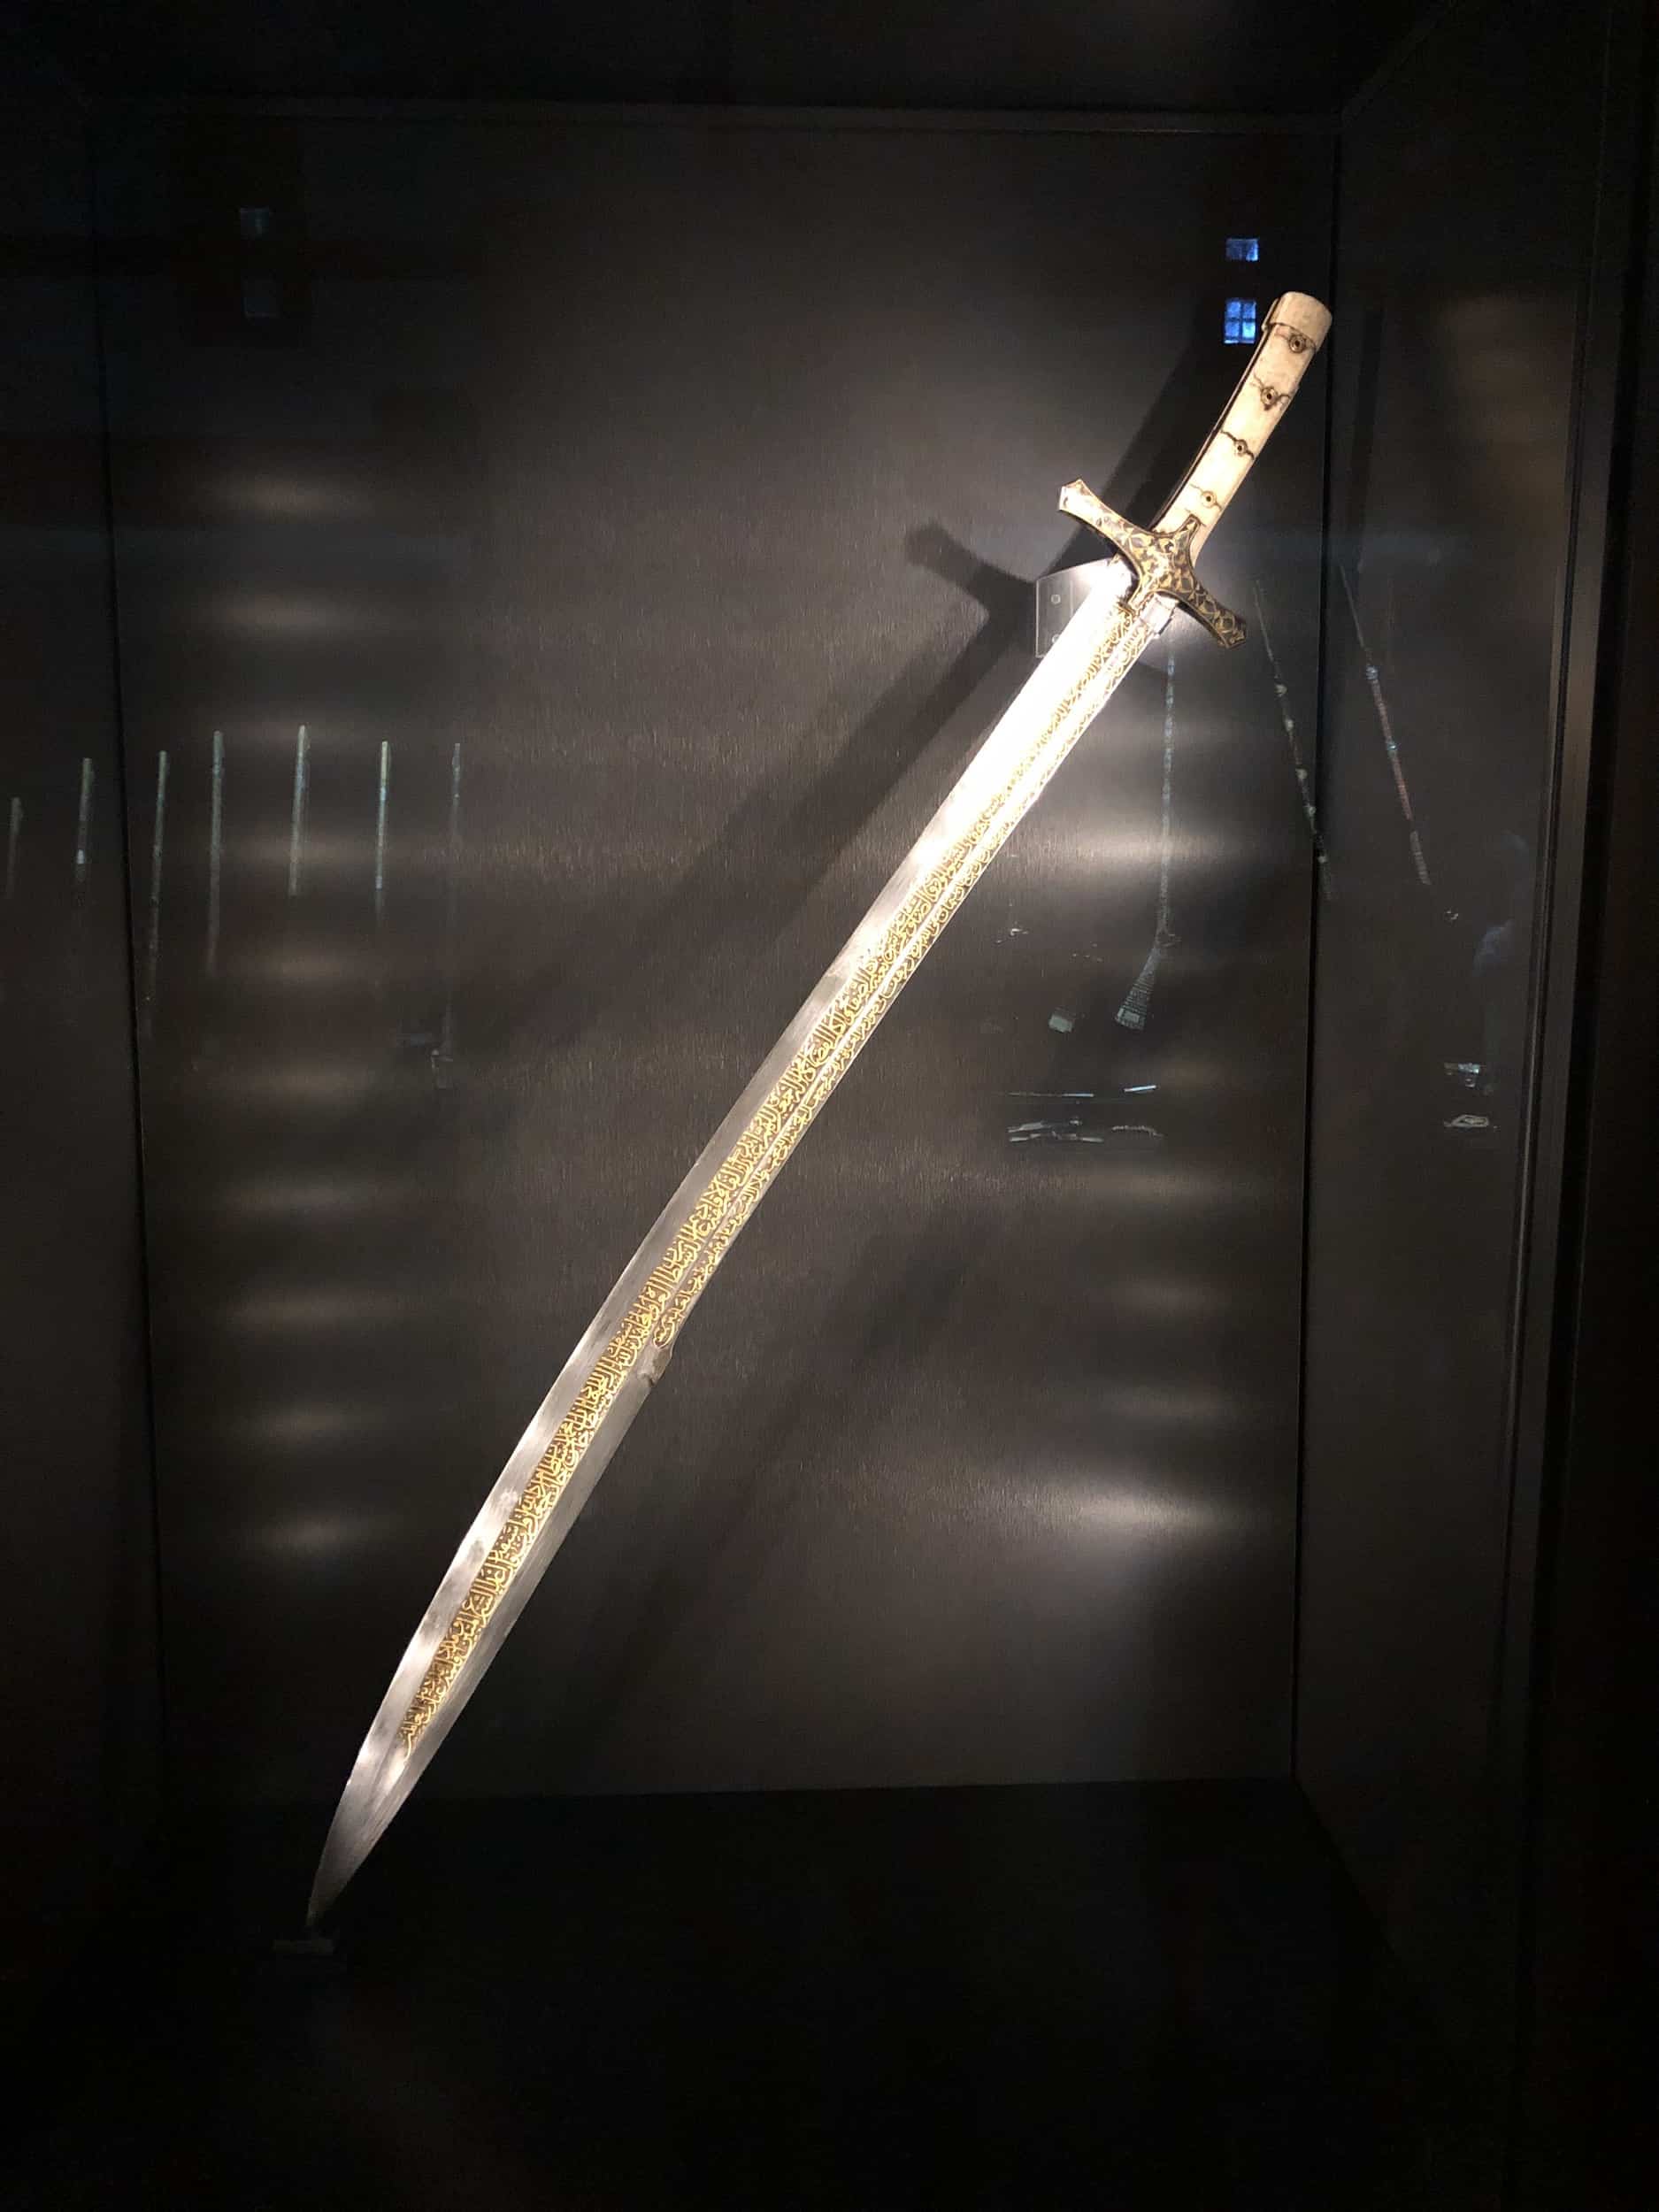 Sword belonging to Sultan Mehmed II; Ottoman; 2nd half of the 15th century in the weapons collection at Topkapi Palace in Istanbul, Turkey